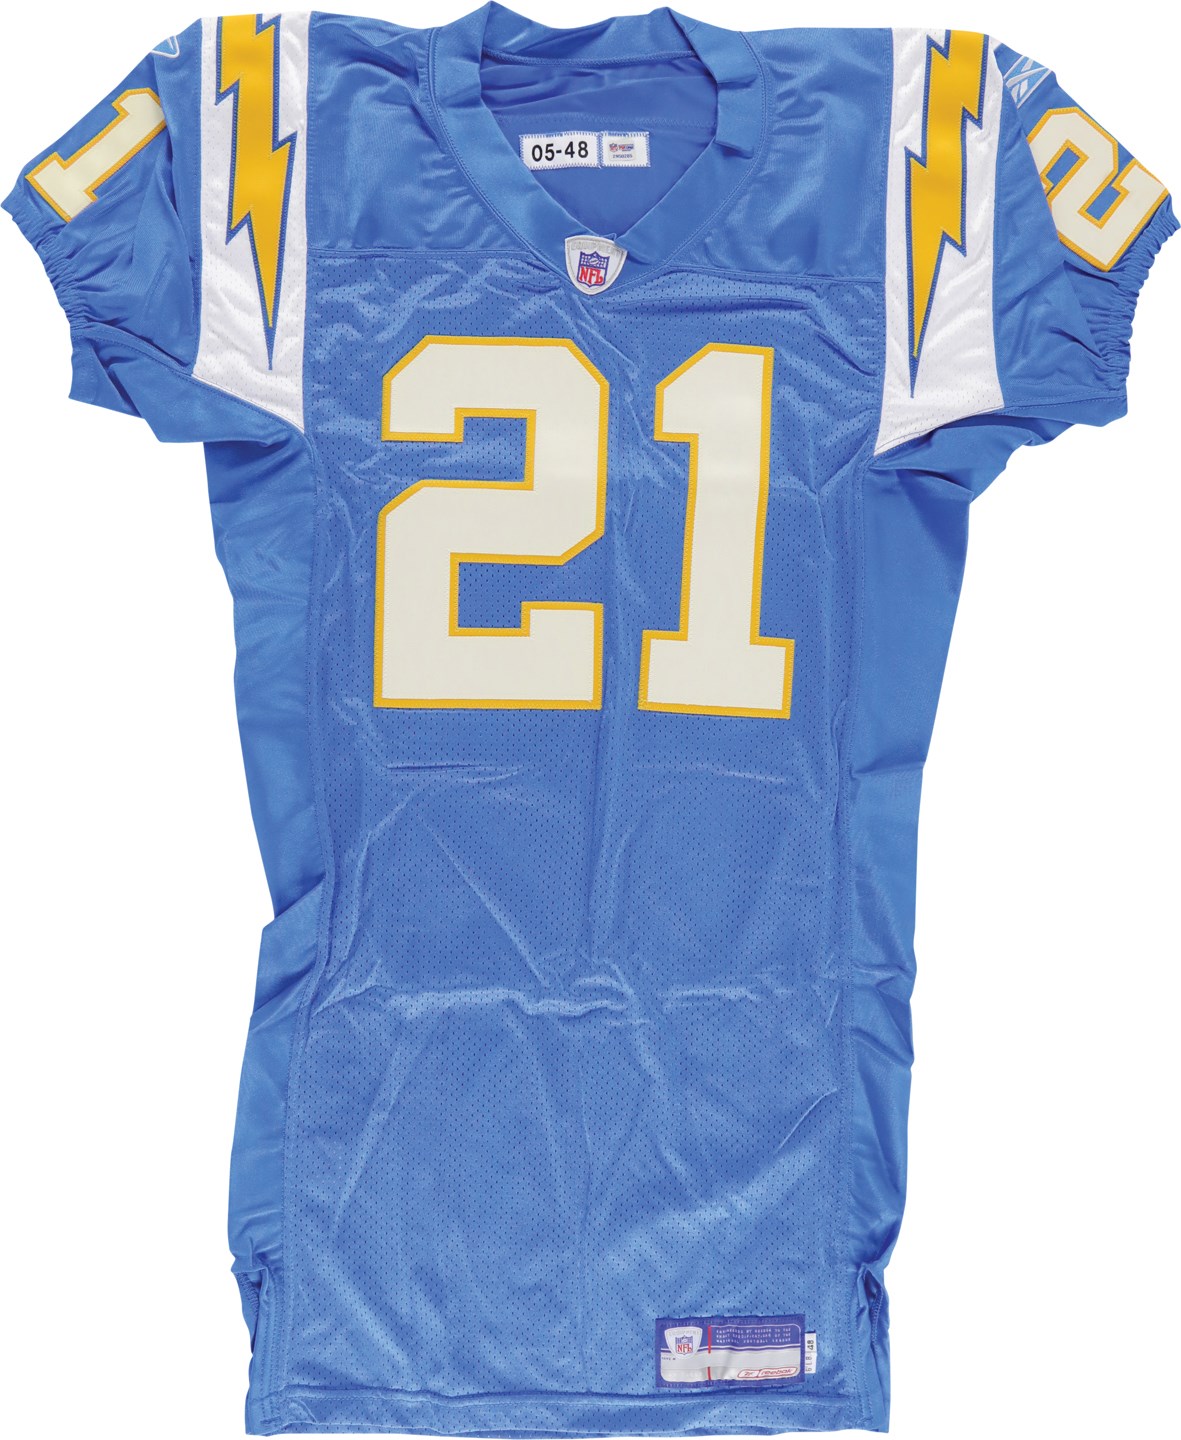 Football - 2005 LaDainian Tomlinson San Diego Chargers Signed Game Jersey PSA